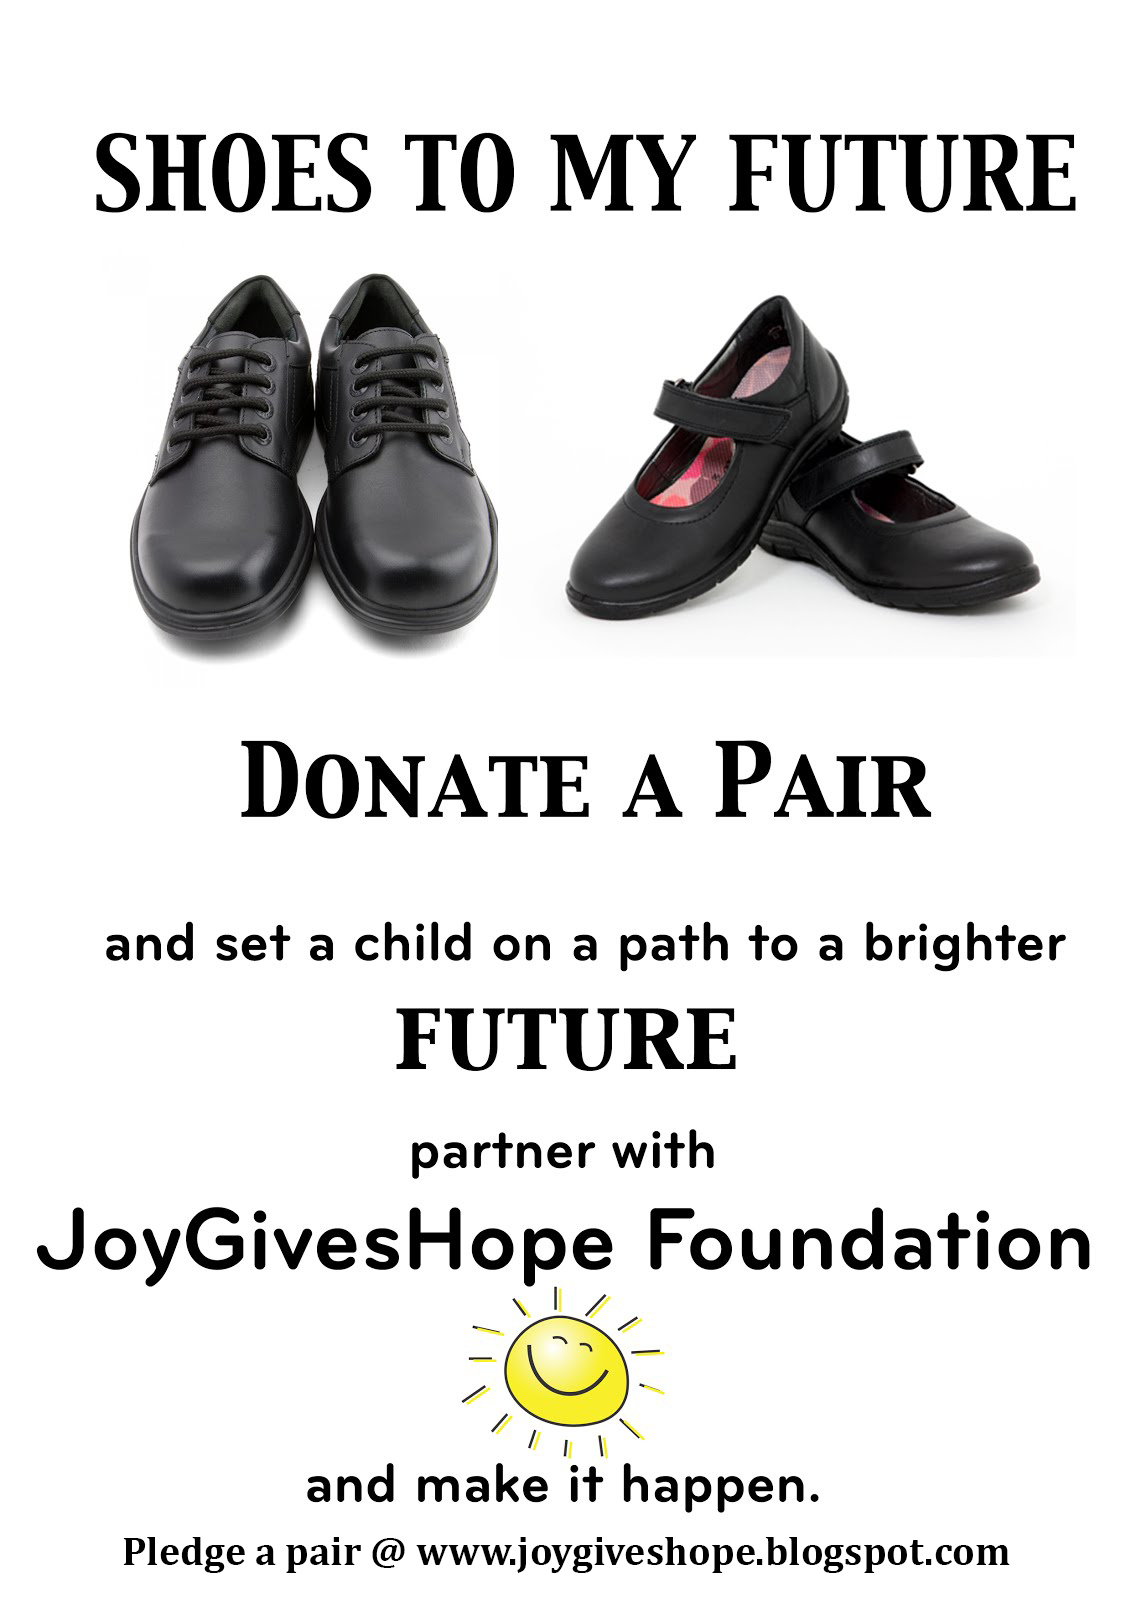 Shoes To My Future Campaign